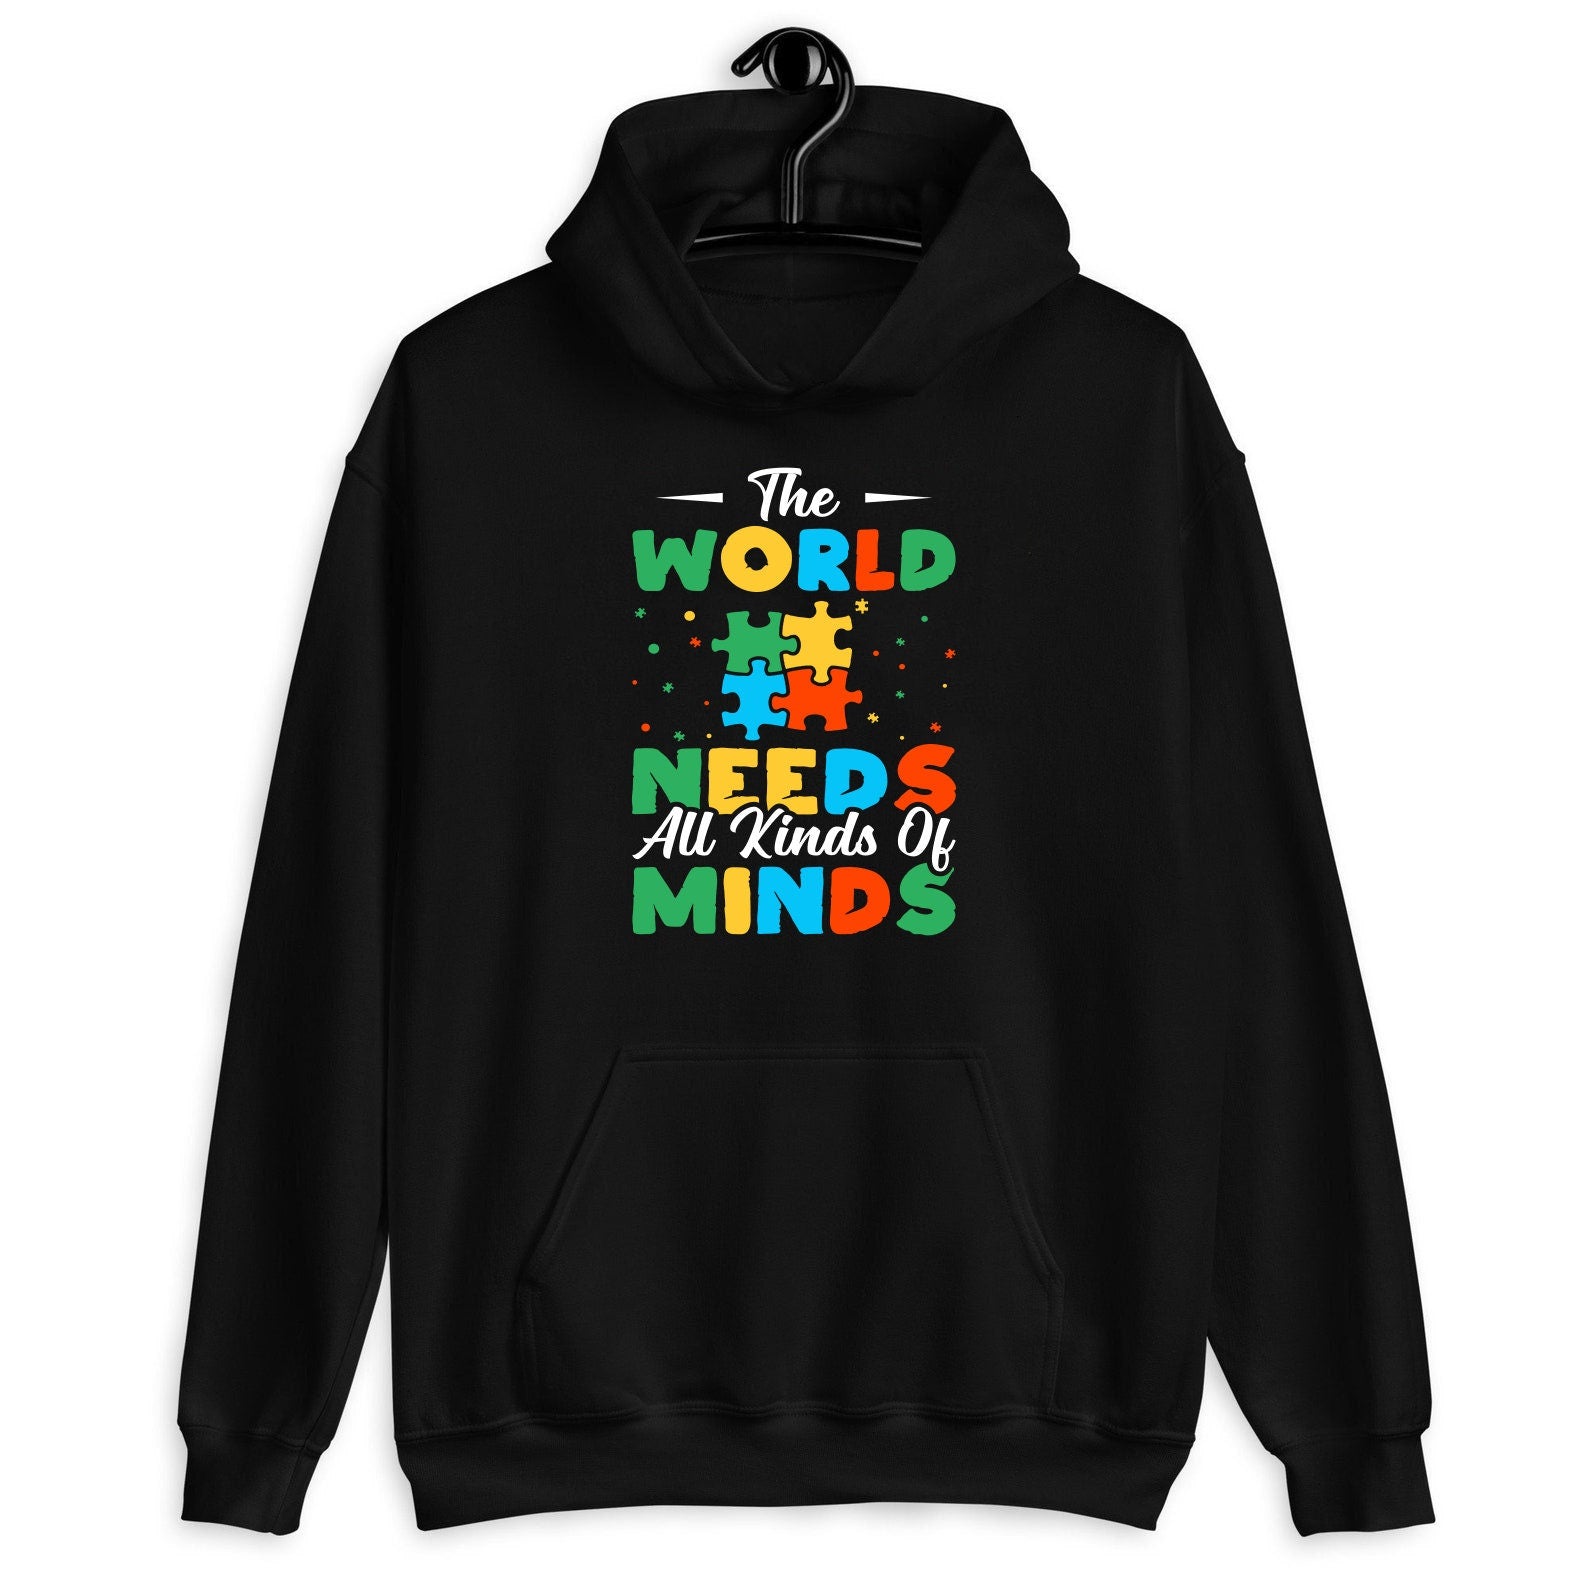 The World Needs All Kind Of Mind Shirt, Autism Awareness Shirt, Autistic Support Shirt, Autism Acceptance